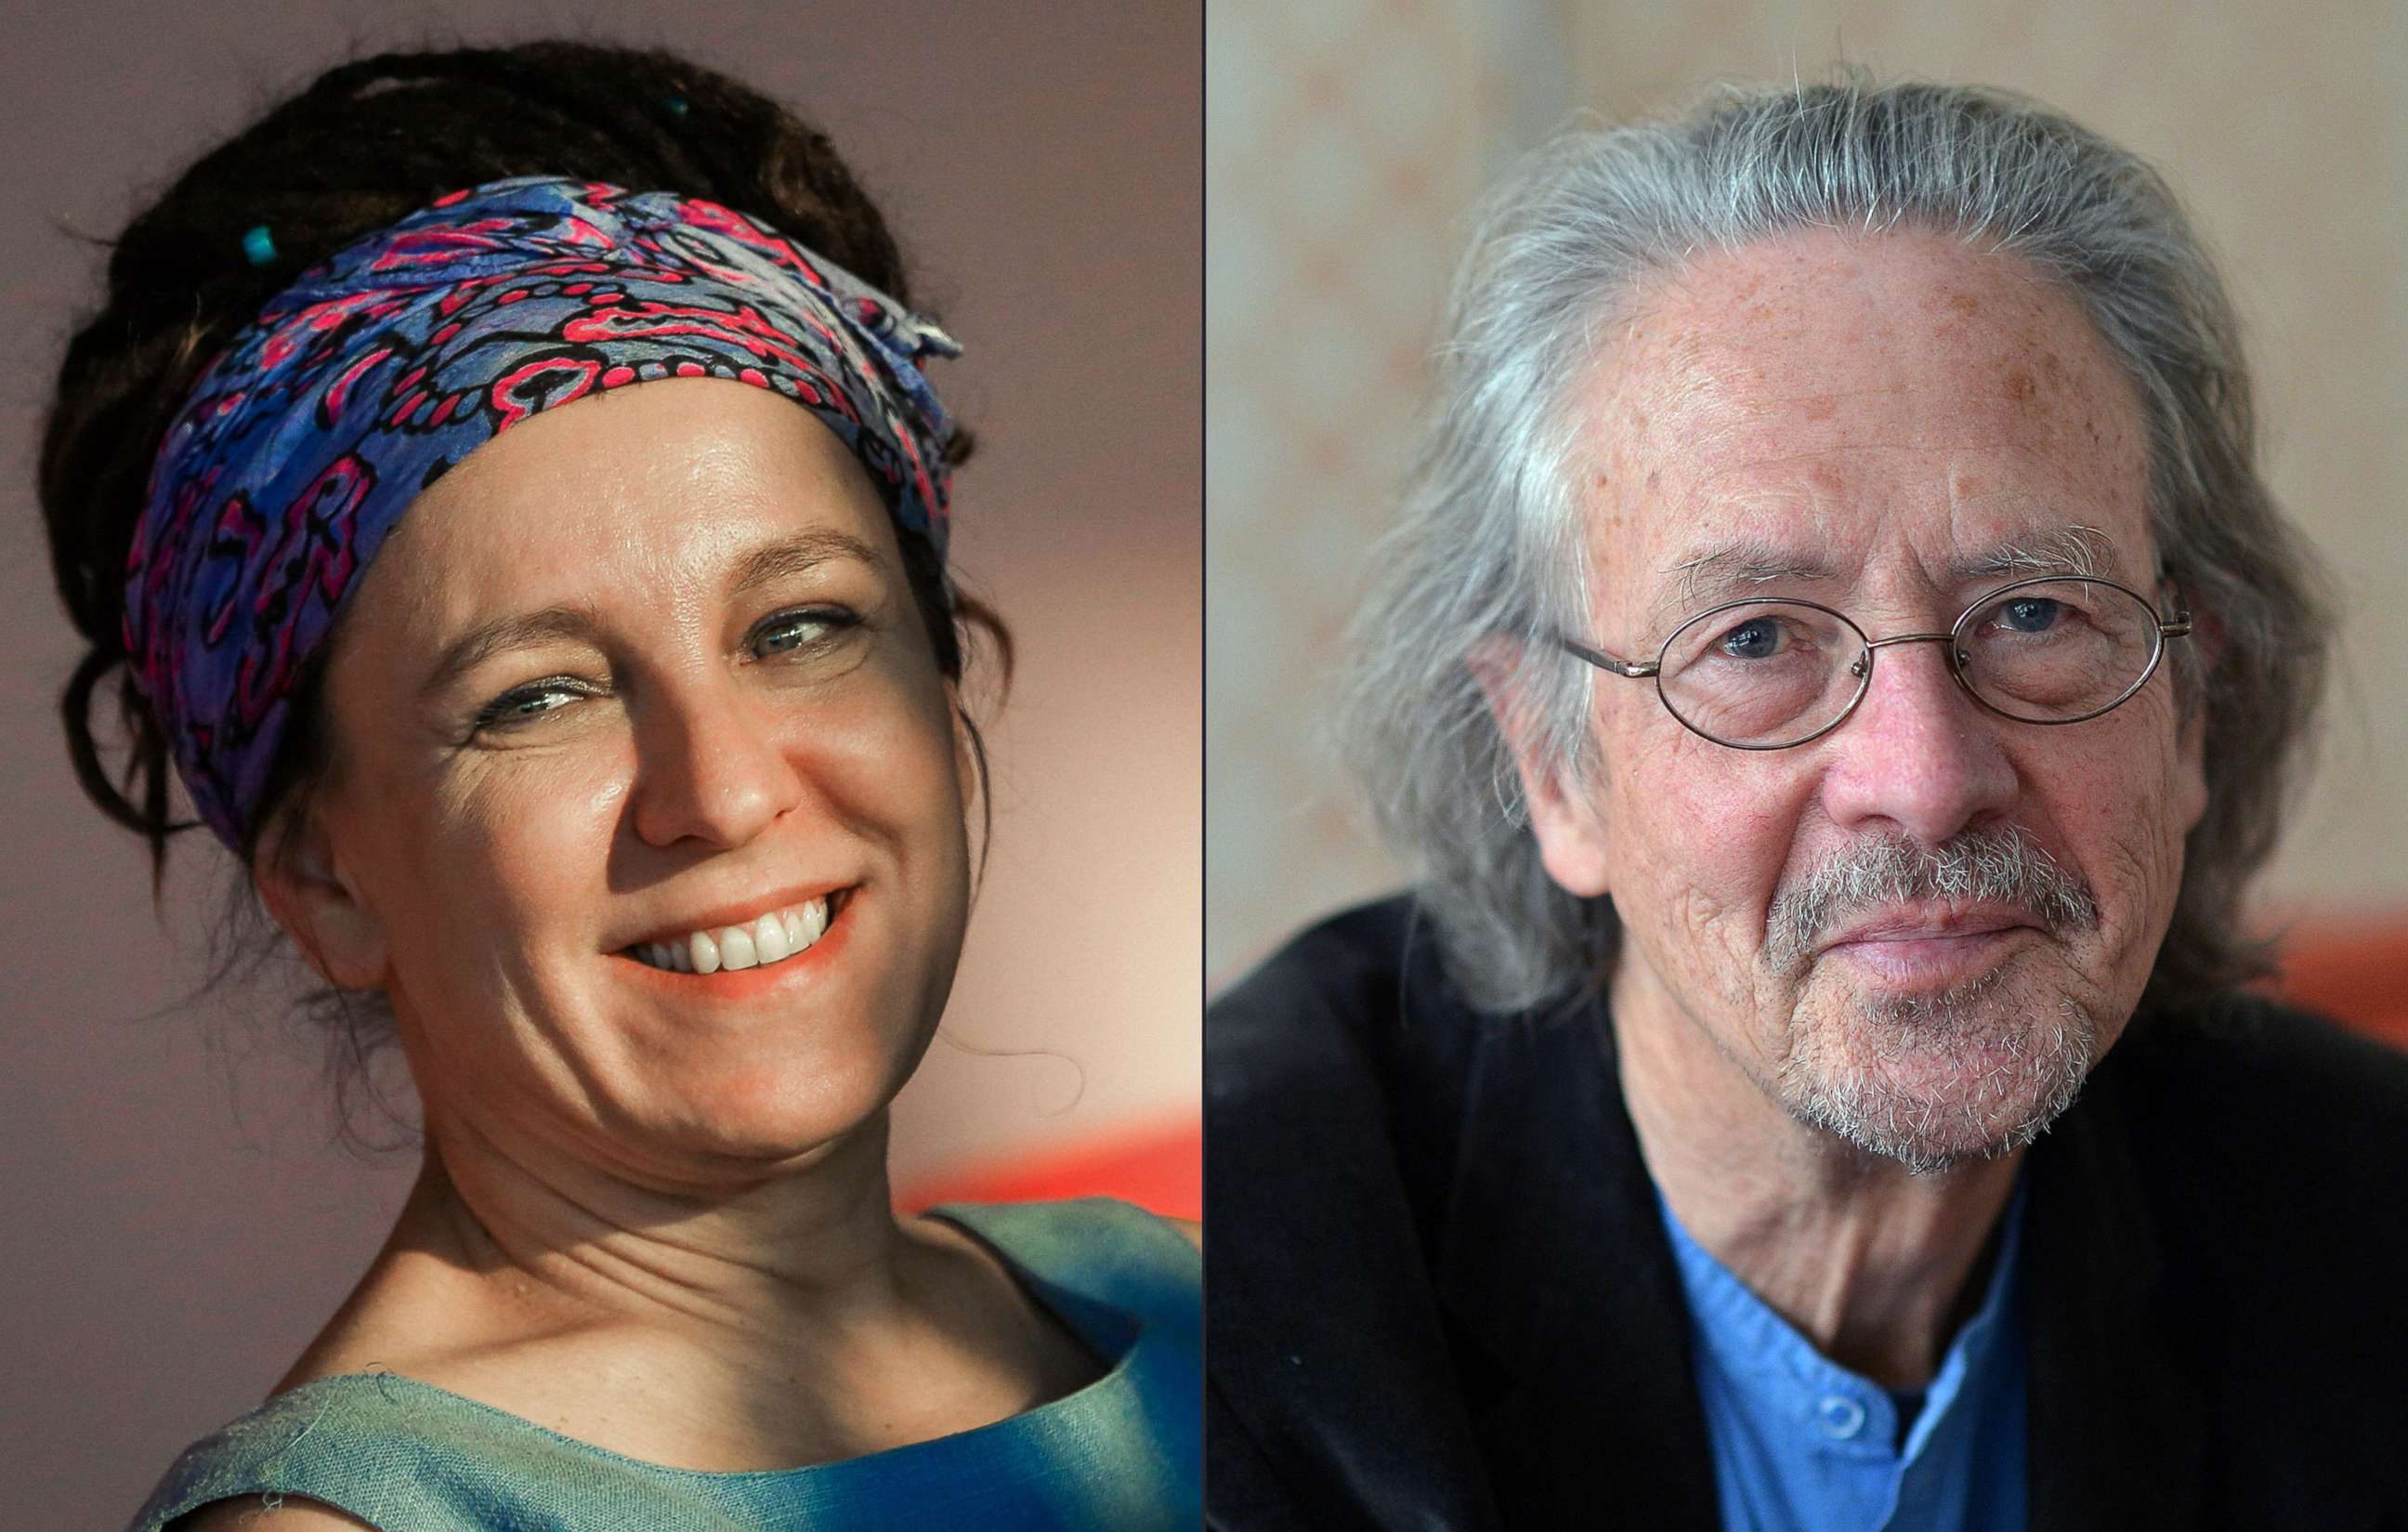 PHOTO: Polish author Olga Tokarczuk, left, and Austrian novelist and playwright Peter Handke, right. Tokarczuk won the 2018 Nobel Literature Prize, which was delayed over a sexual harassment scandal, and Peter Handke took the 2019 award.